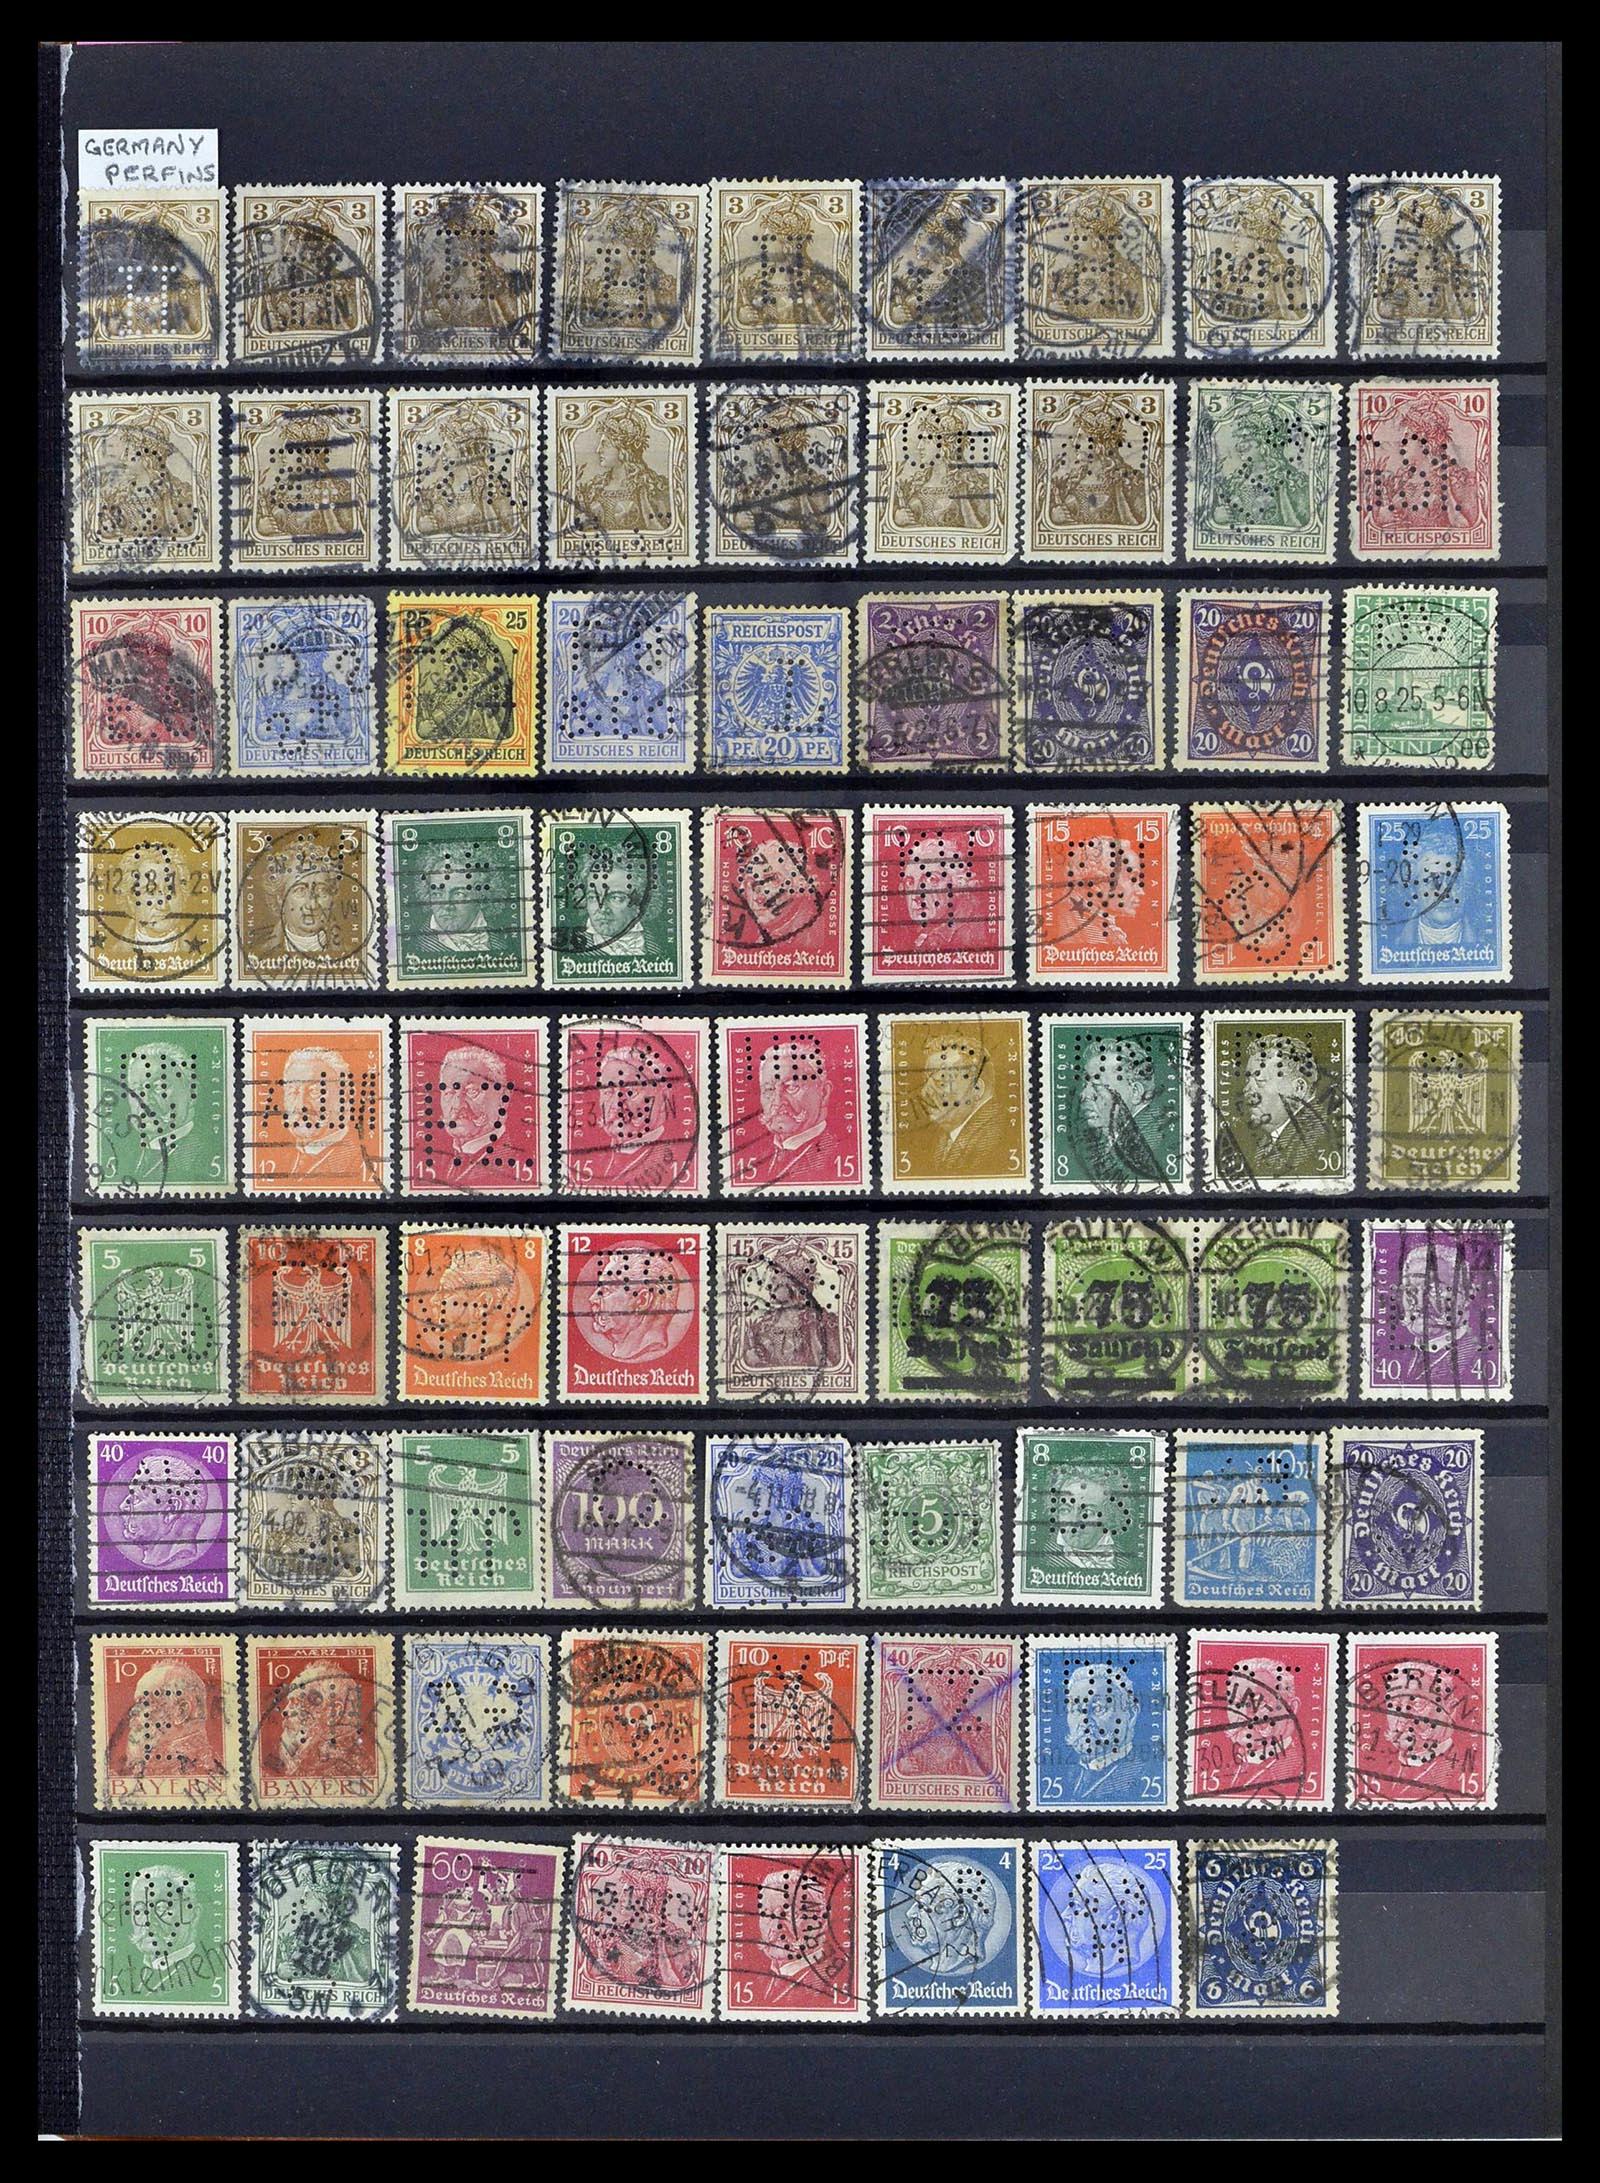 39196 0130 - Stamp collection 39196 Great Britain 1844-1955.